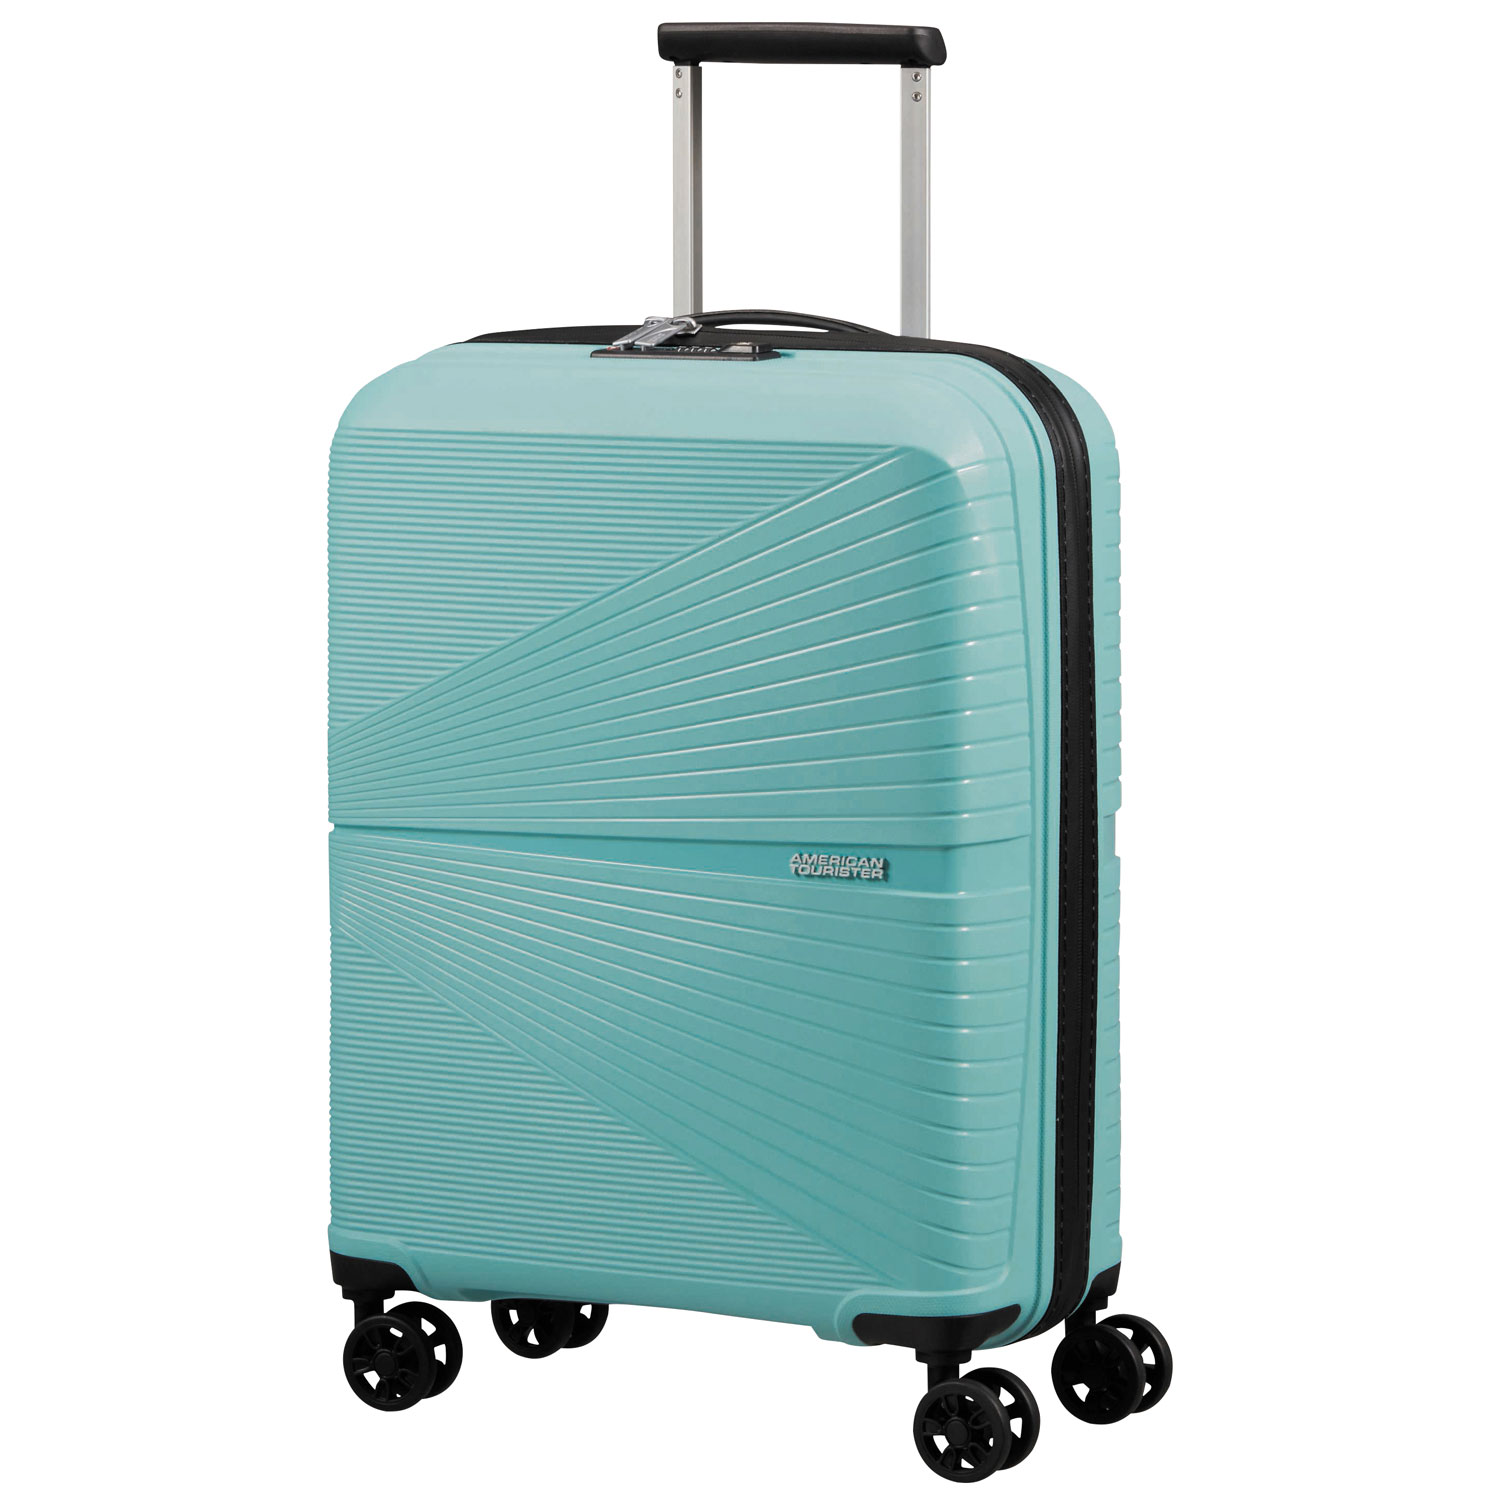 American Tourister Airconic 19" Hard Side Carry-On Luggage - Purist Blue